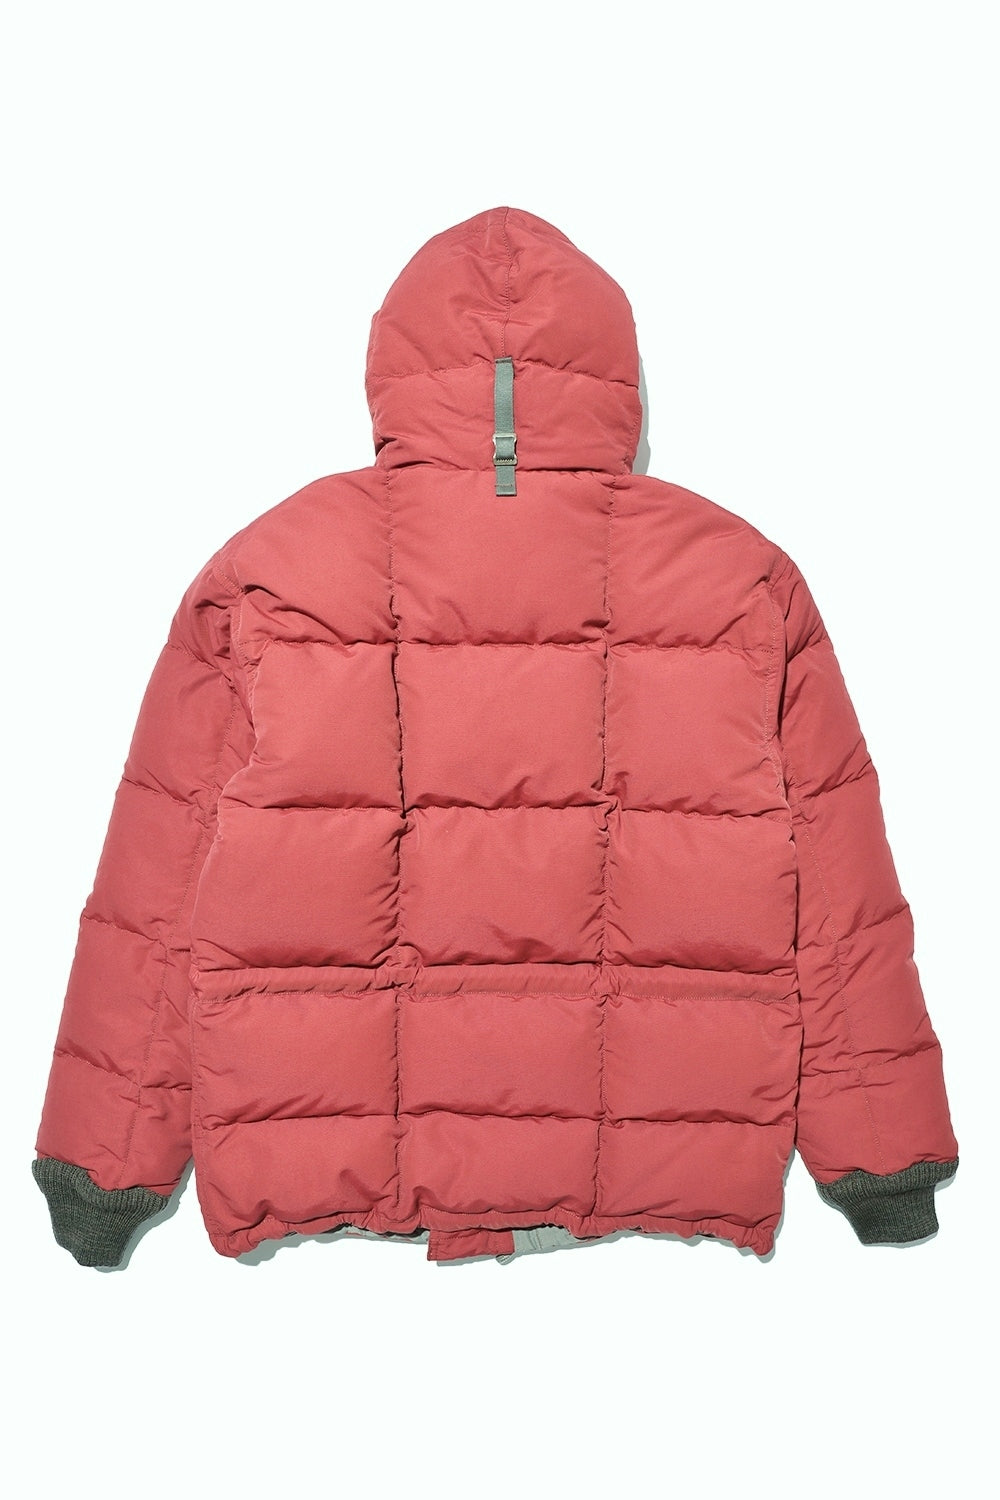 Colimbo Red Expedition Down Parka 10% off